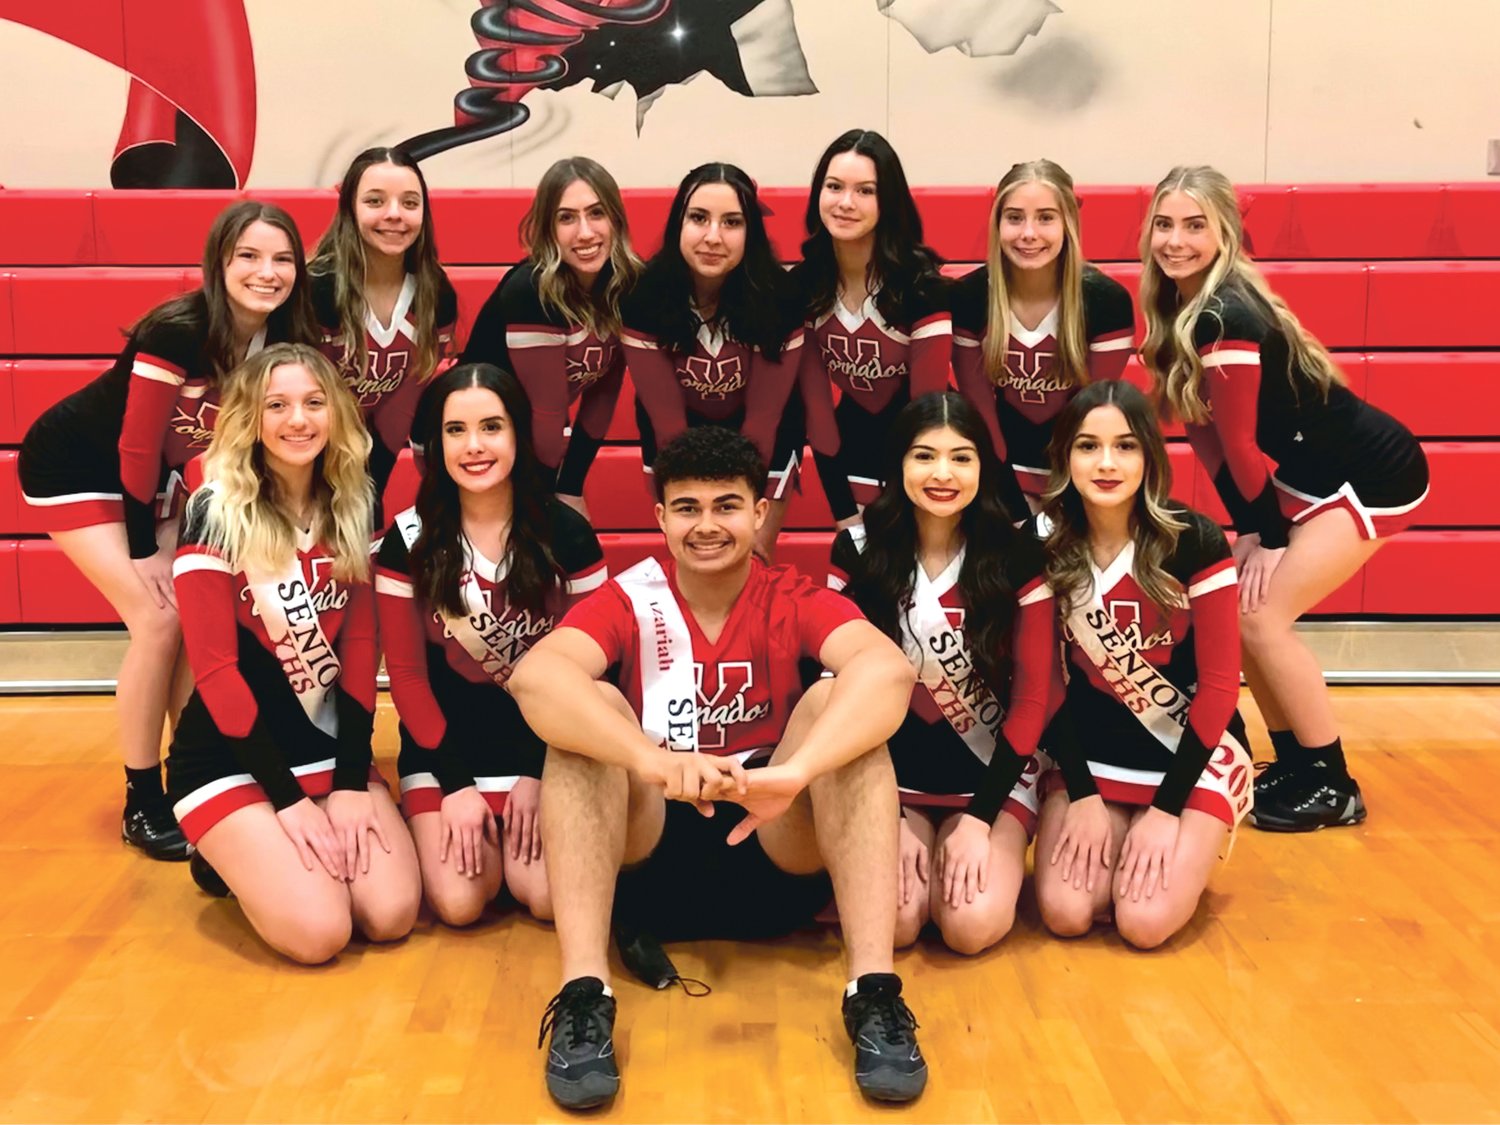 The Yelm cheerleading team is pictured.